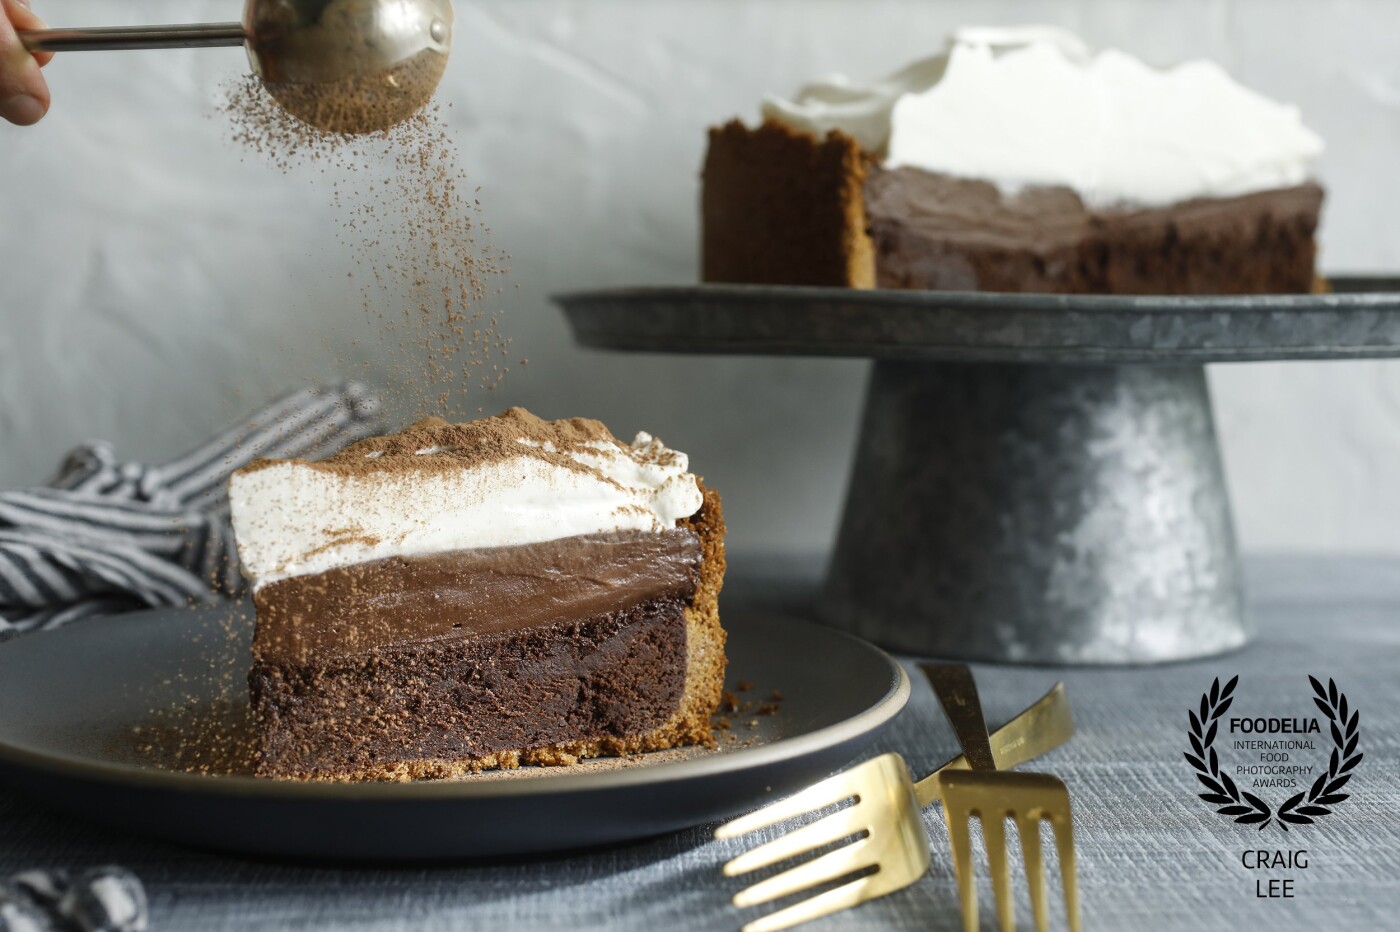 Dusting of cocoa powder on Mississippi Mud Pie. Recipe photographed for the New York Times Cooking section @nytfood. It's a nice rich dessert for the chocolate lover. Styled by @the_bojon_gourmet and @snixykitchen.